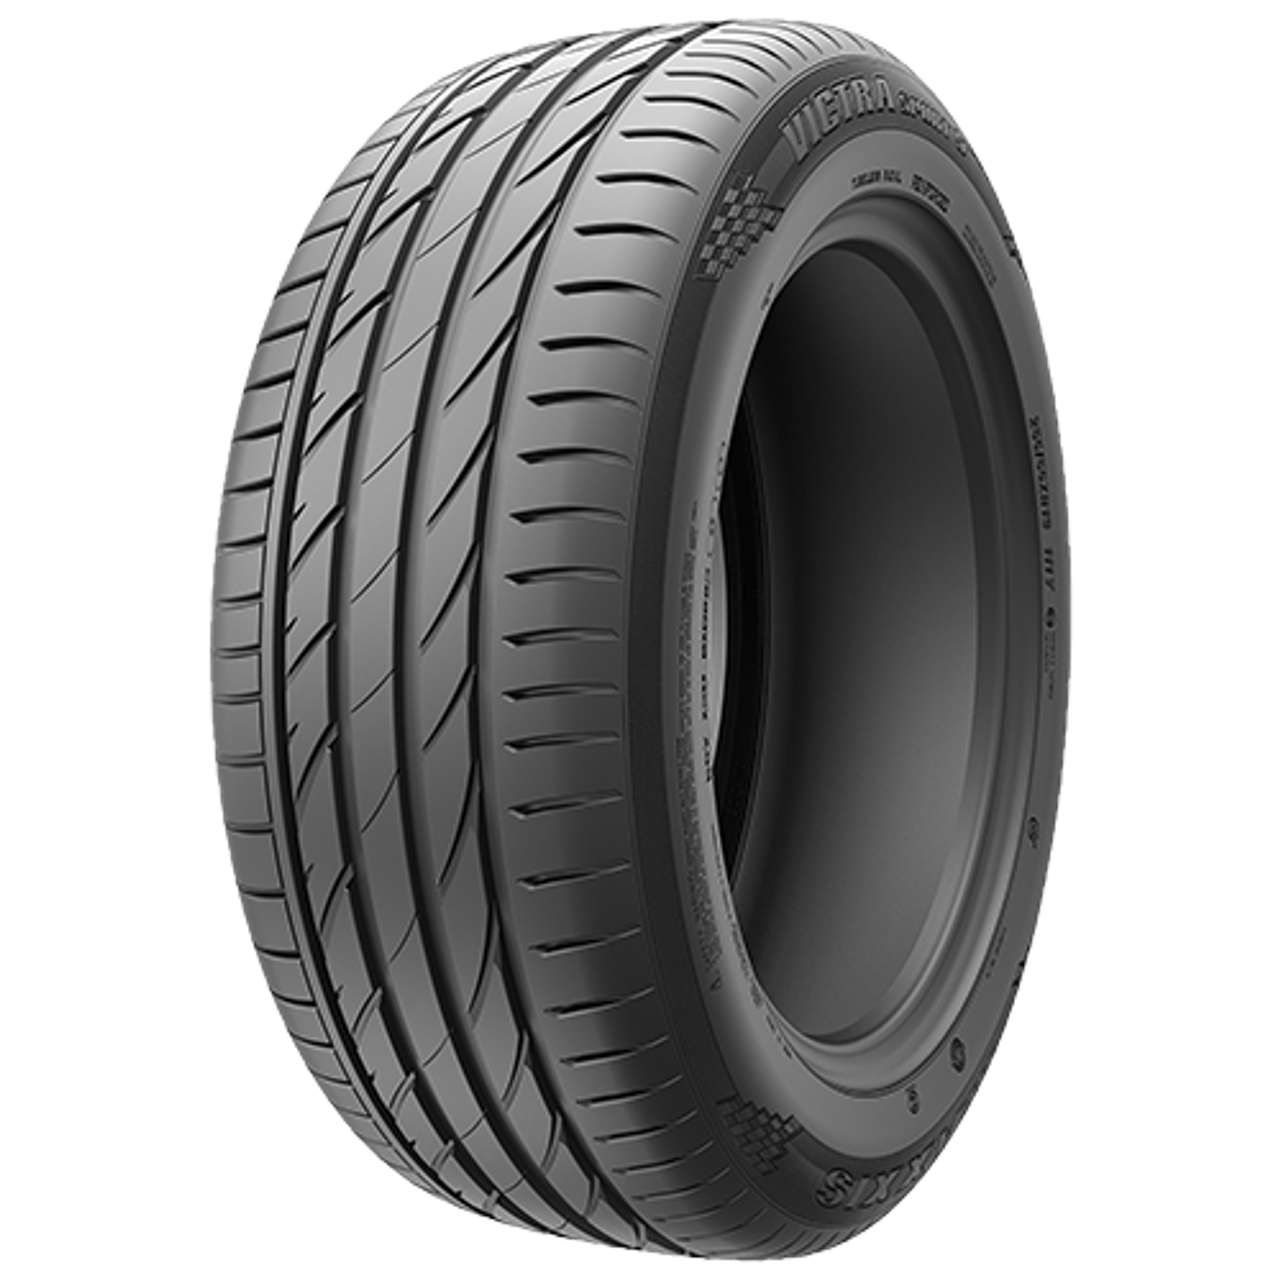 MAXXIS VICTRA SPORT 5 (VS5) SUV 215/65R17 103V BSW von MAXXIS